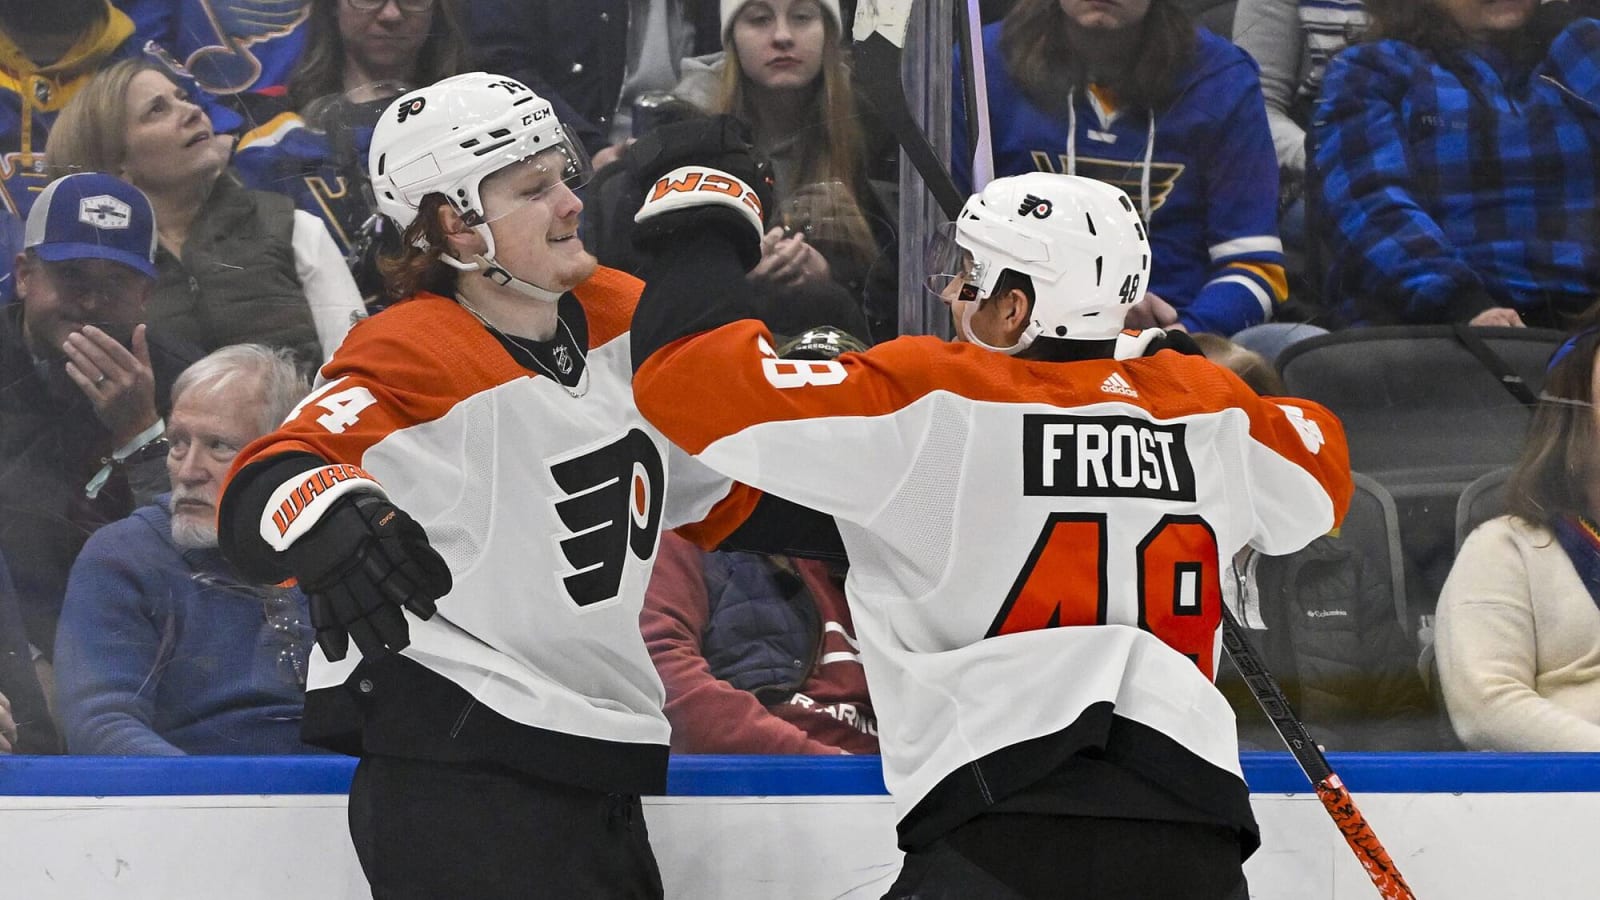 ‘We’re looking to prove people wrong:’ Flyers’ Morgan Frost wants to show team’s strong season was no fluke